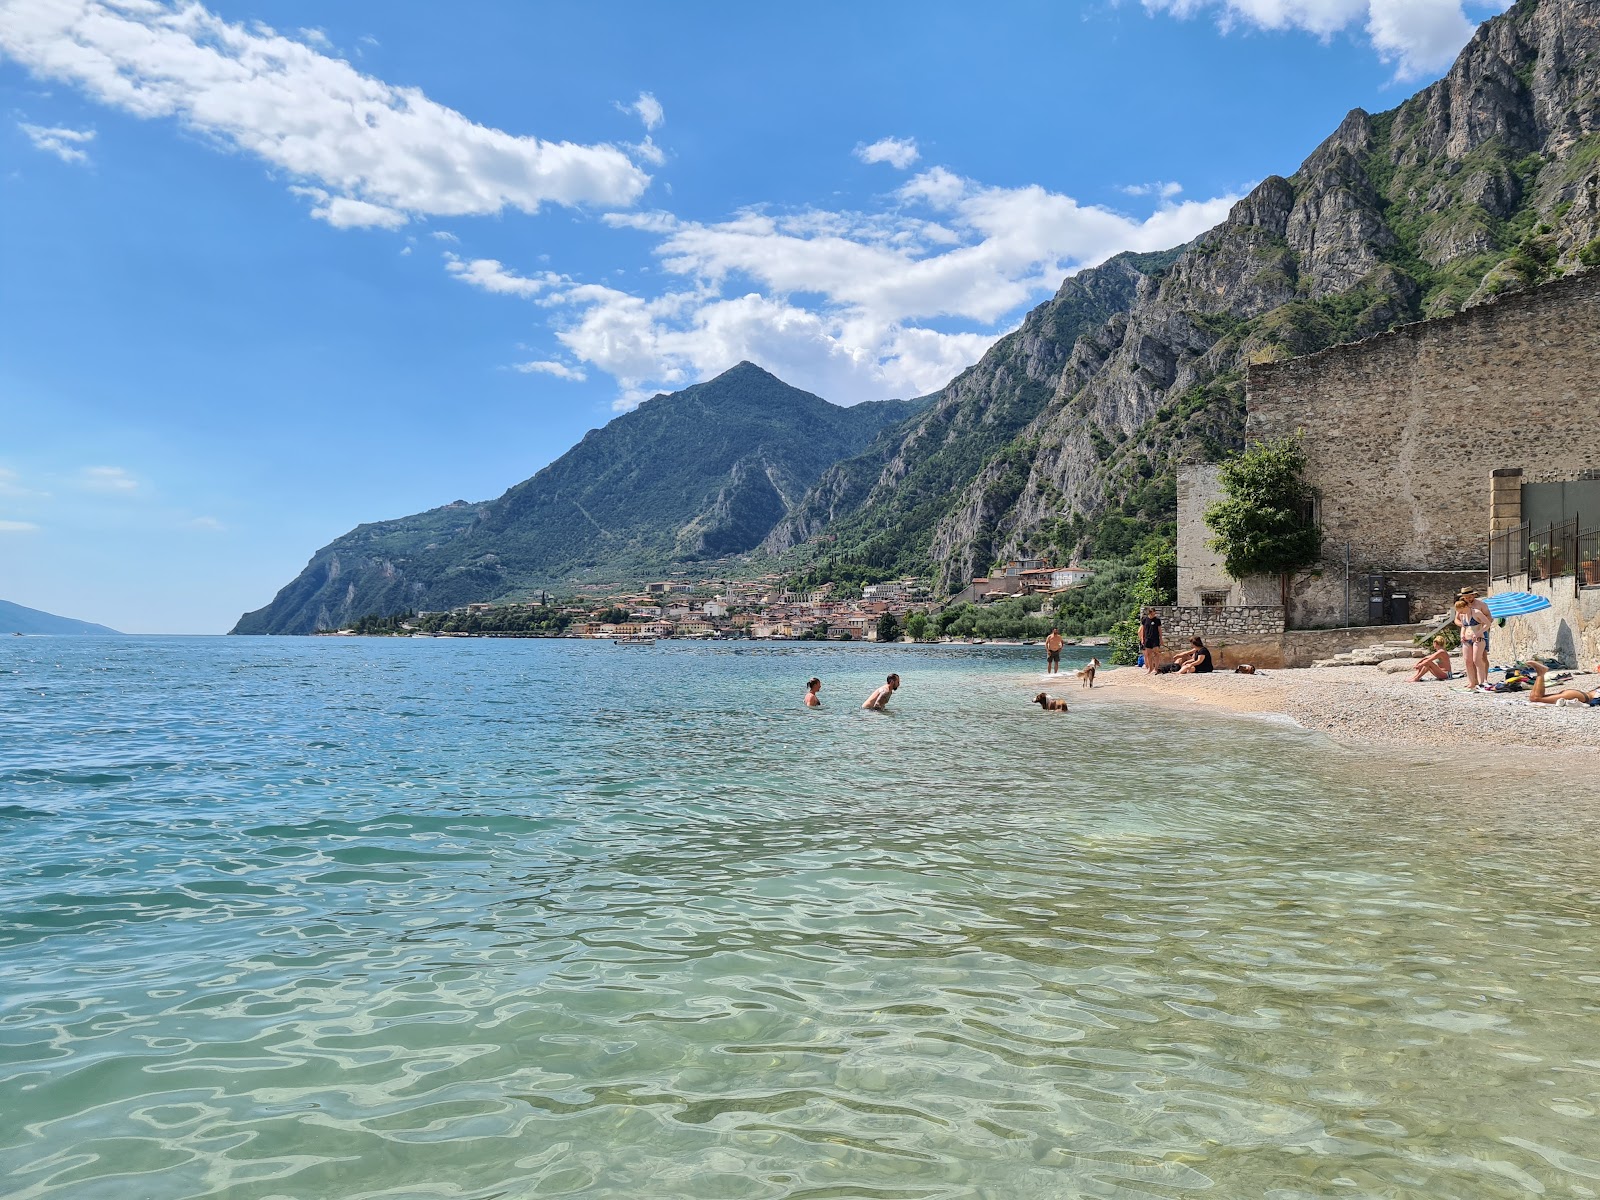 Photo of Spiaggia Per Cani with gray pebble surface